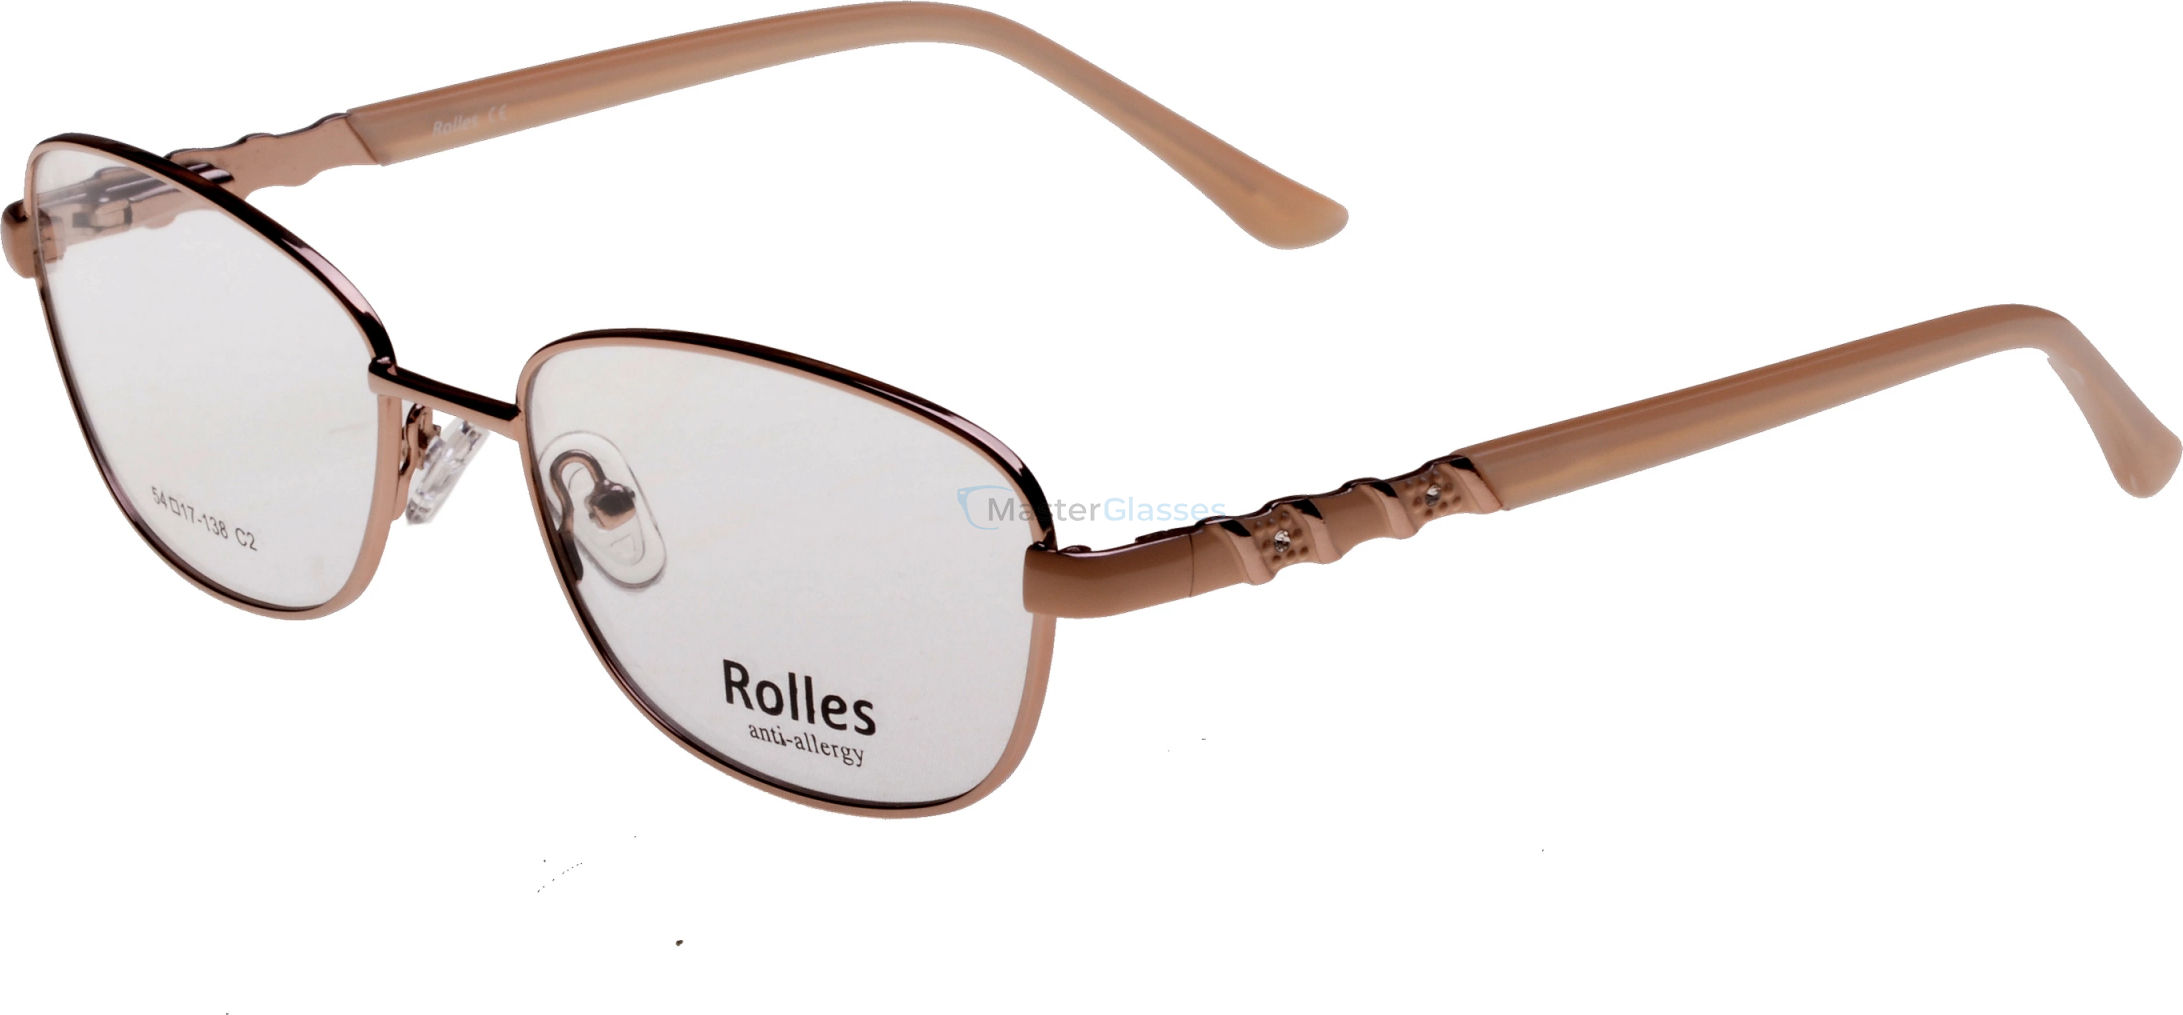  Rolles 349 02